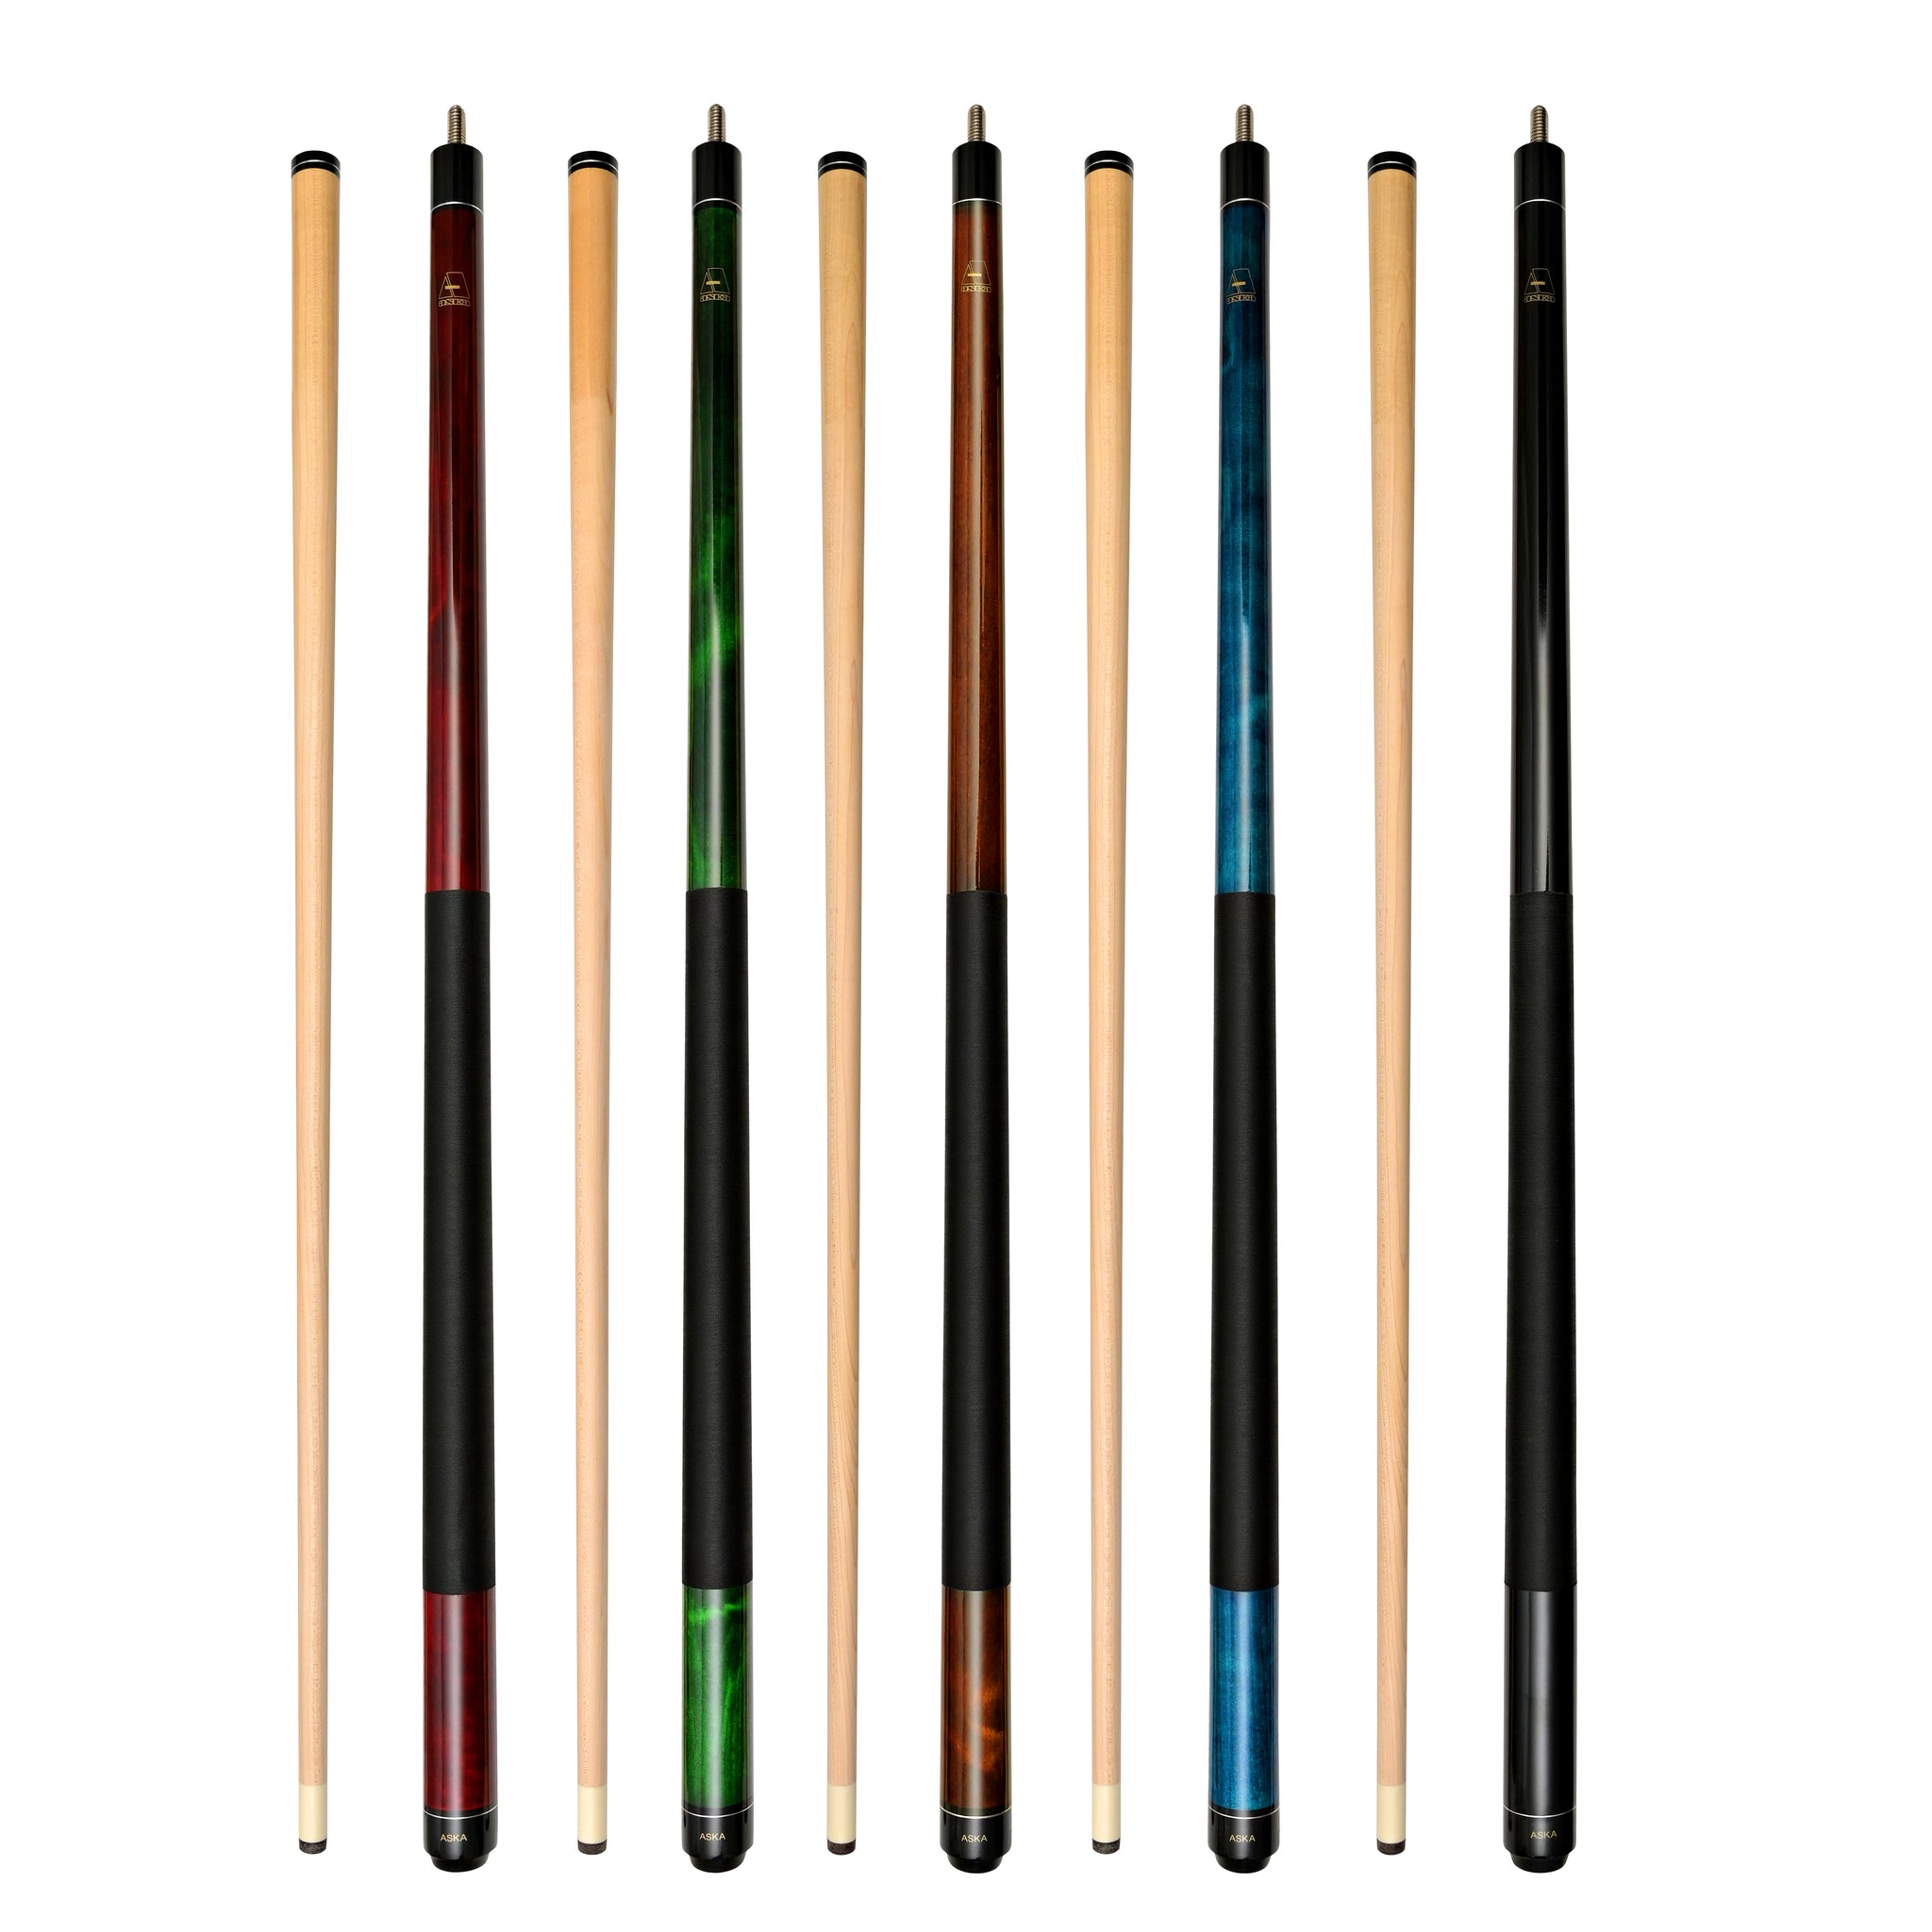 Le Pro Pool Cue Stick Tips - 13 MM - Set of 10